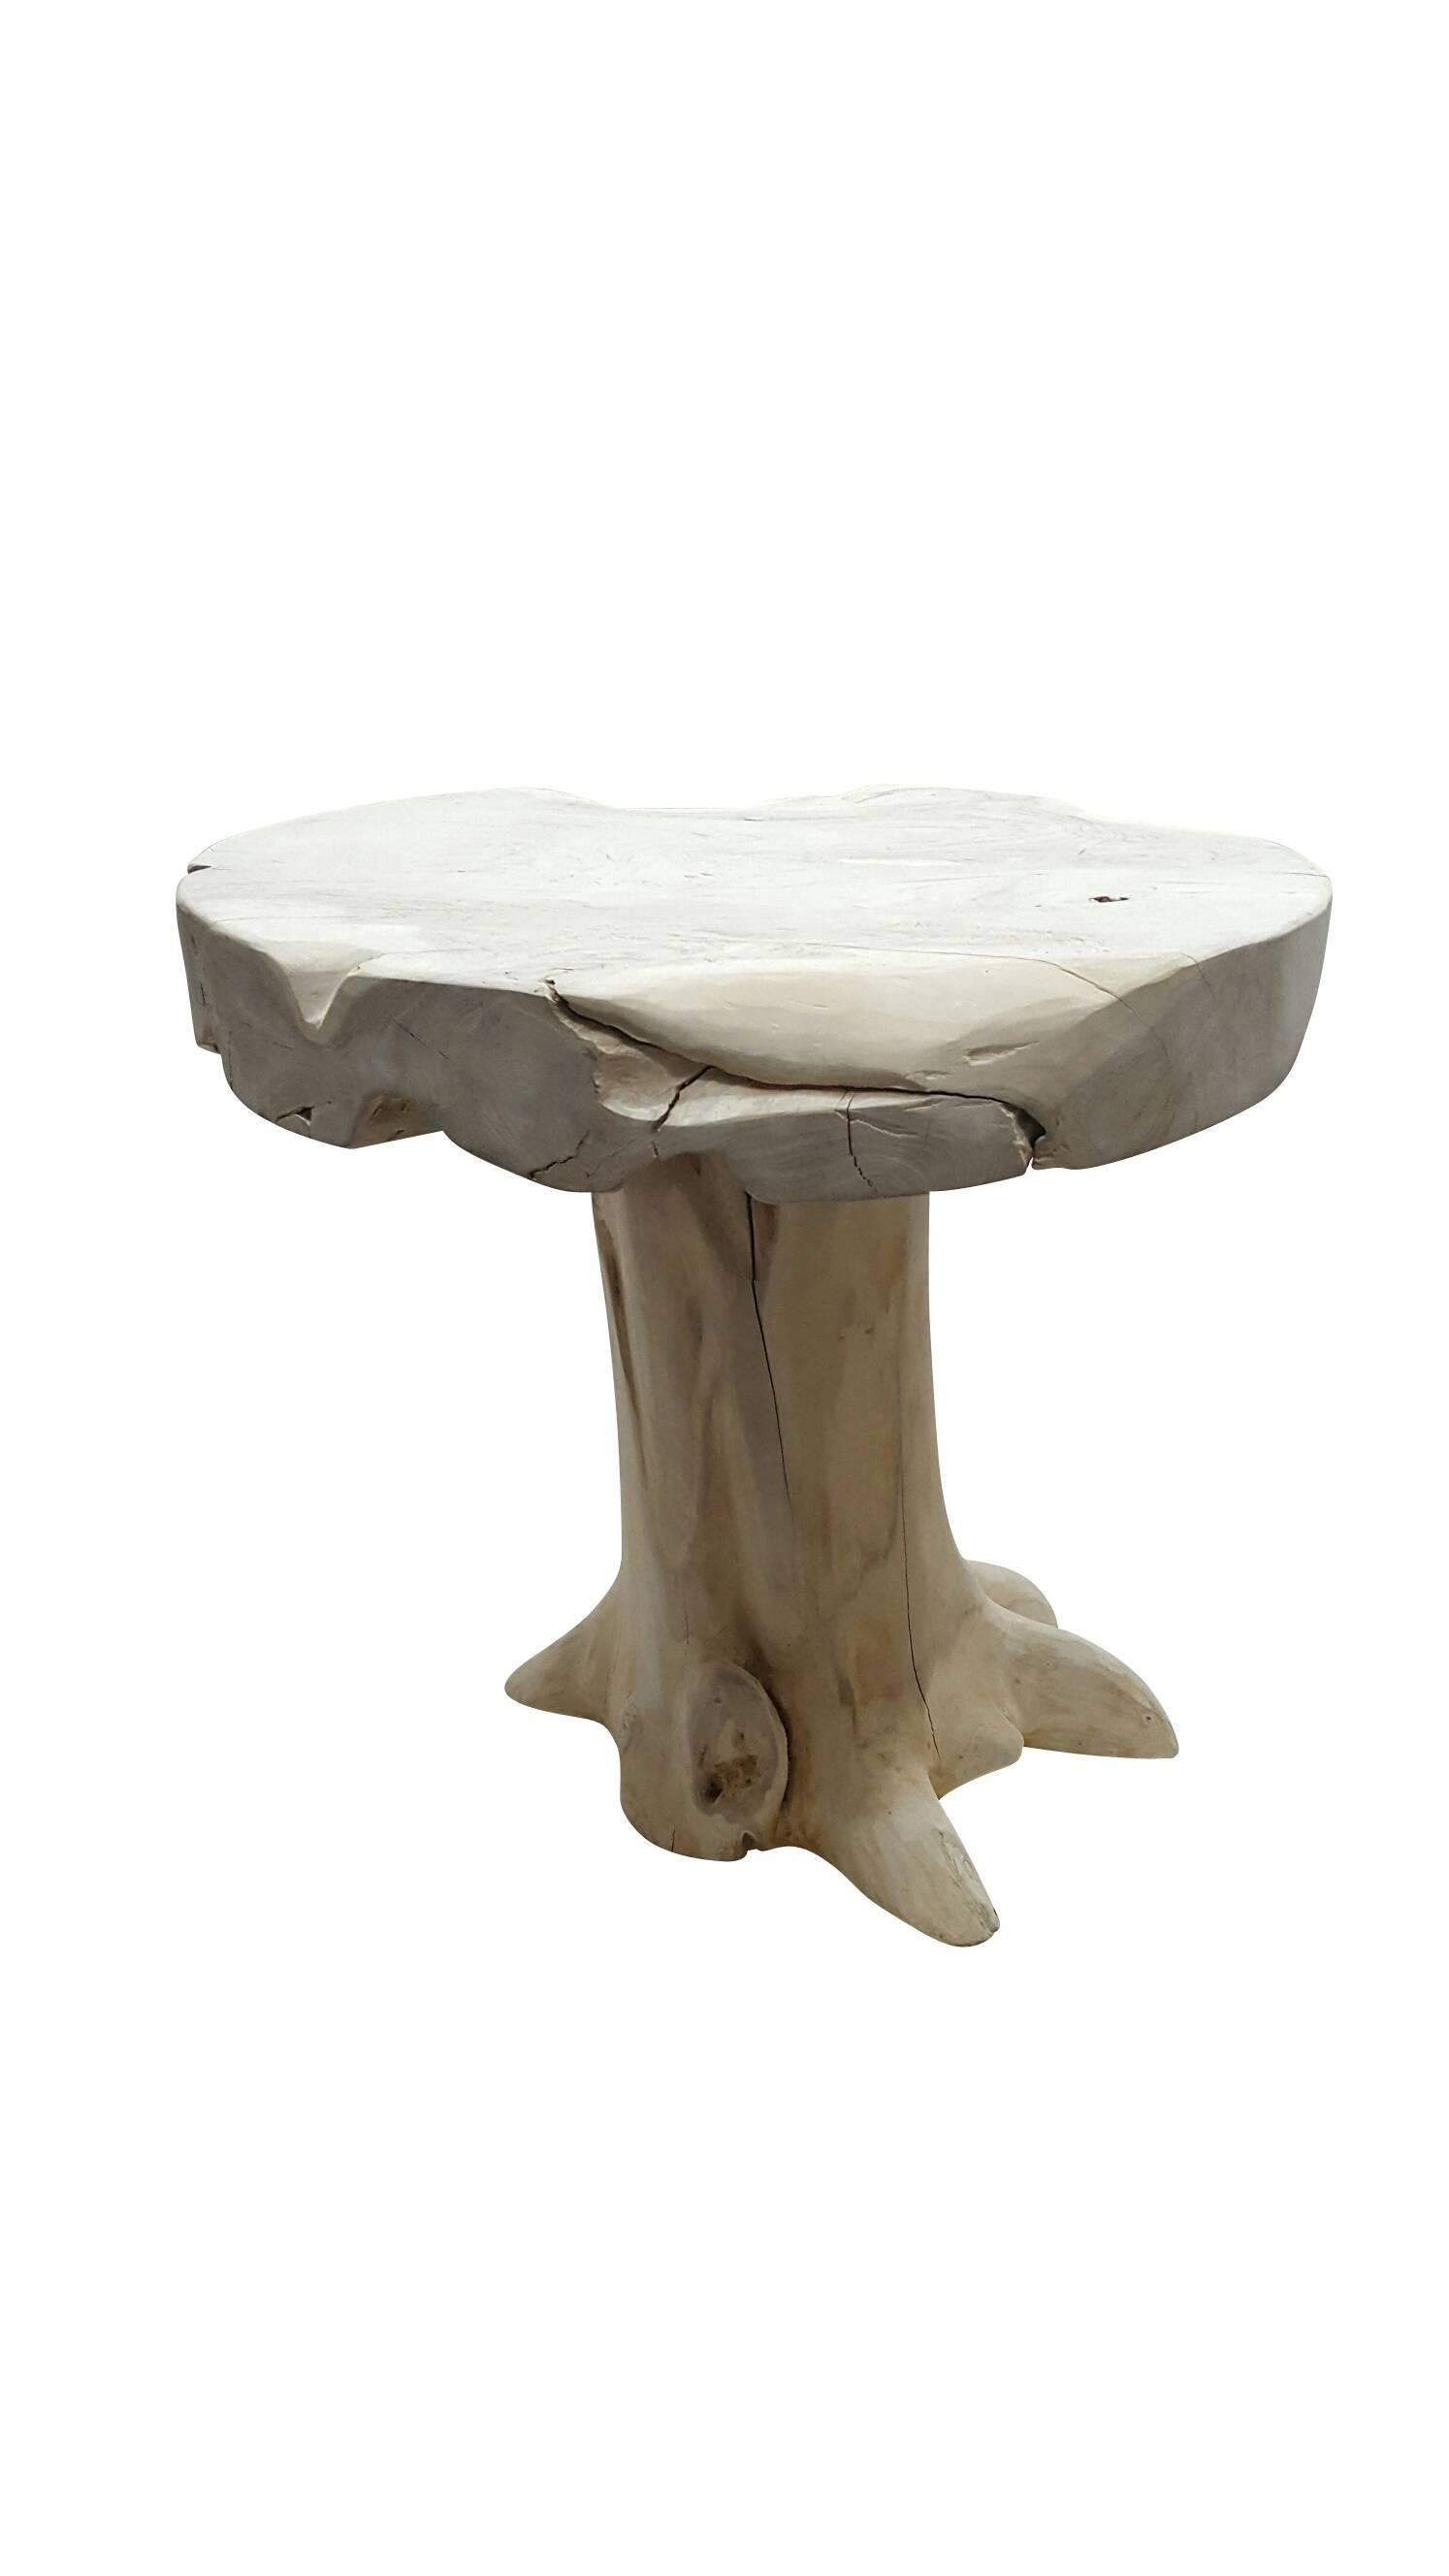 Beautiful teak bleached round table
One of the kind.